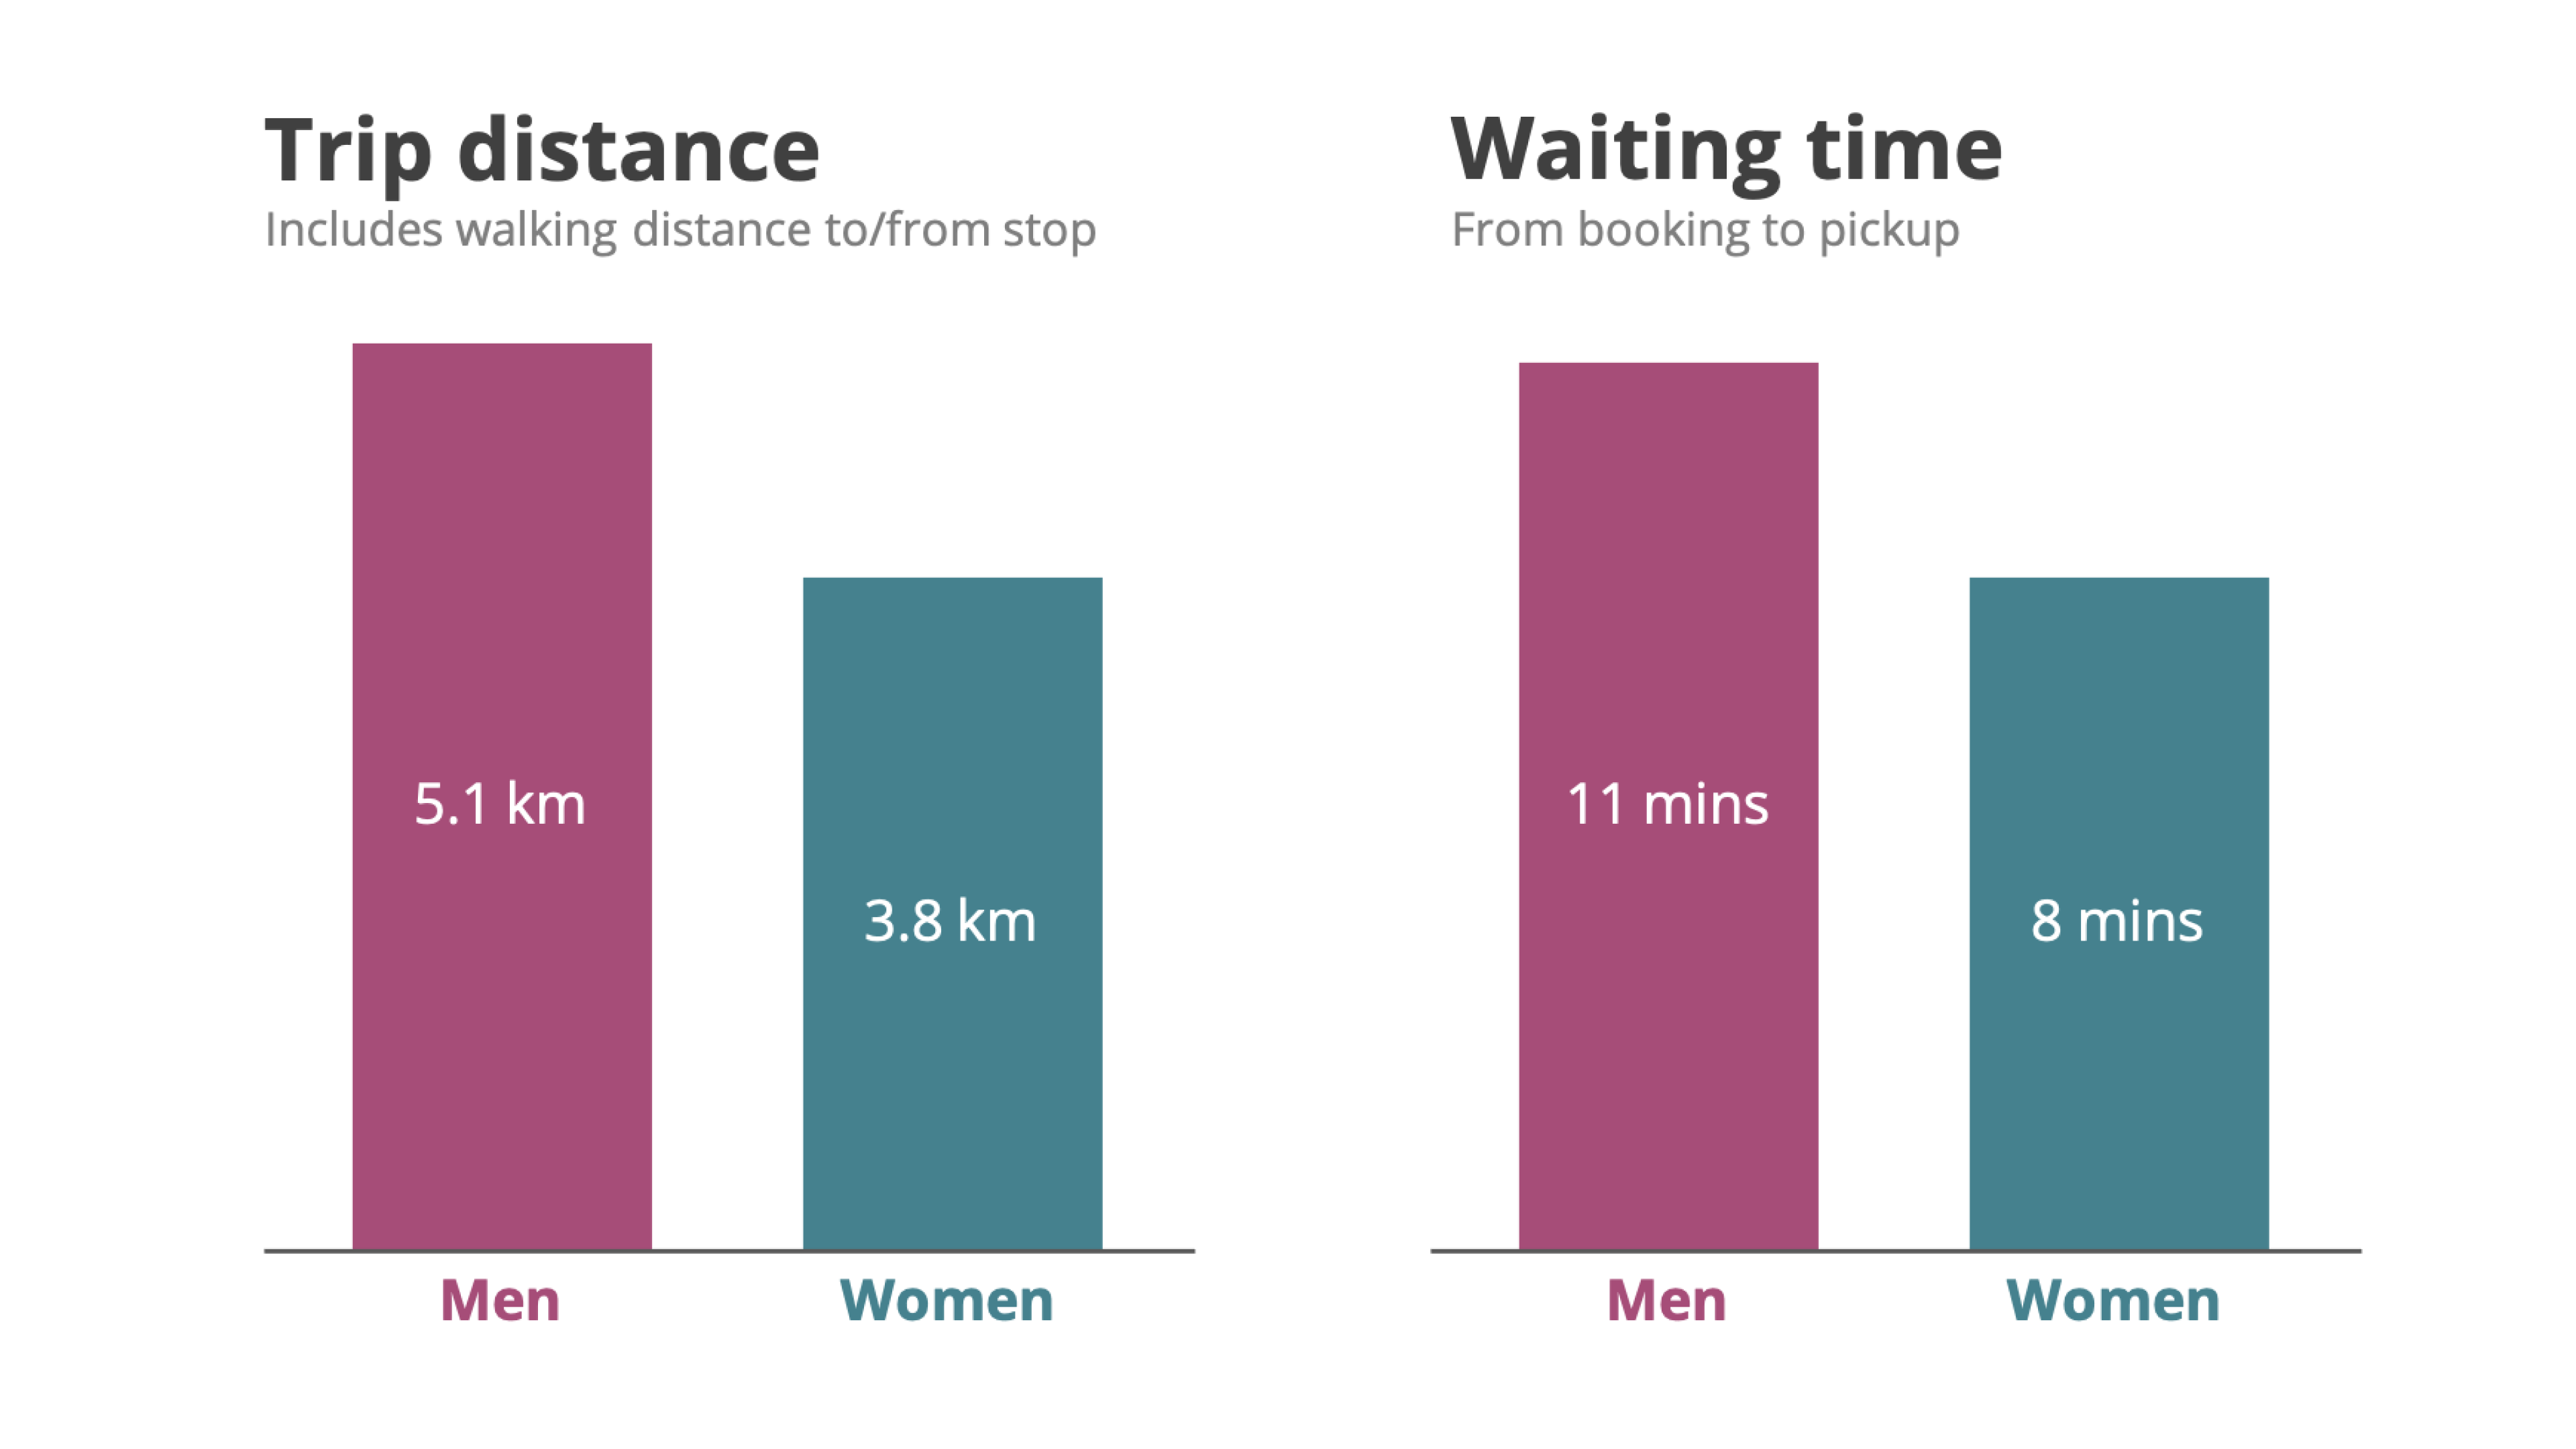 Trip distance and waiting times